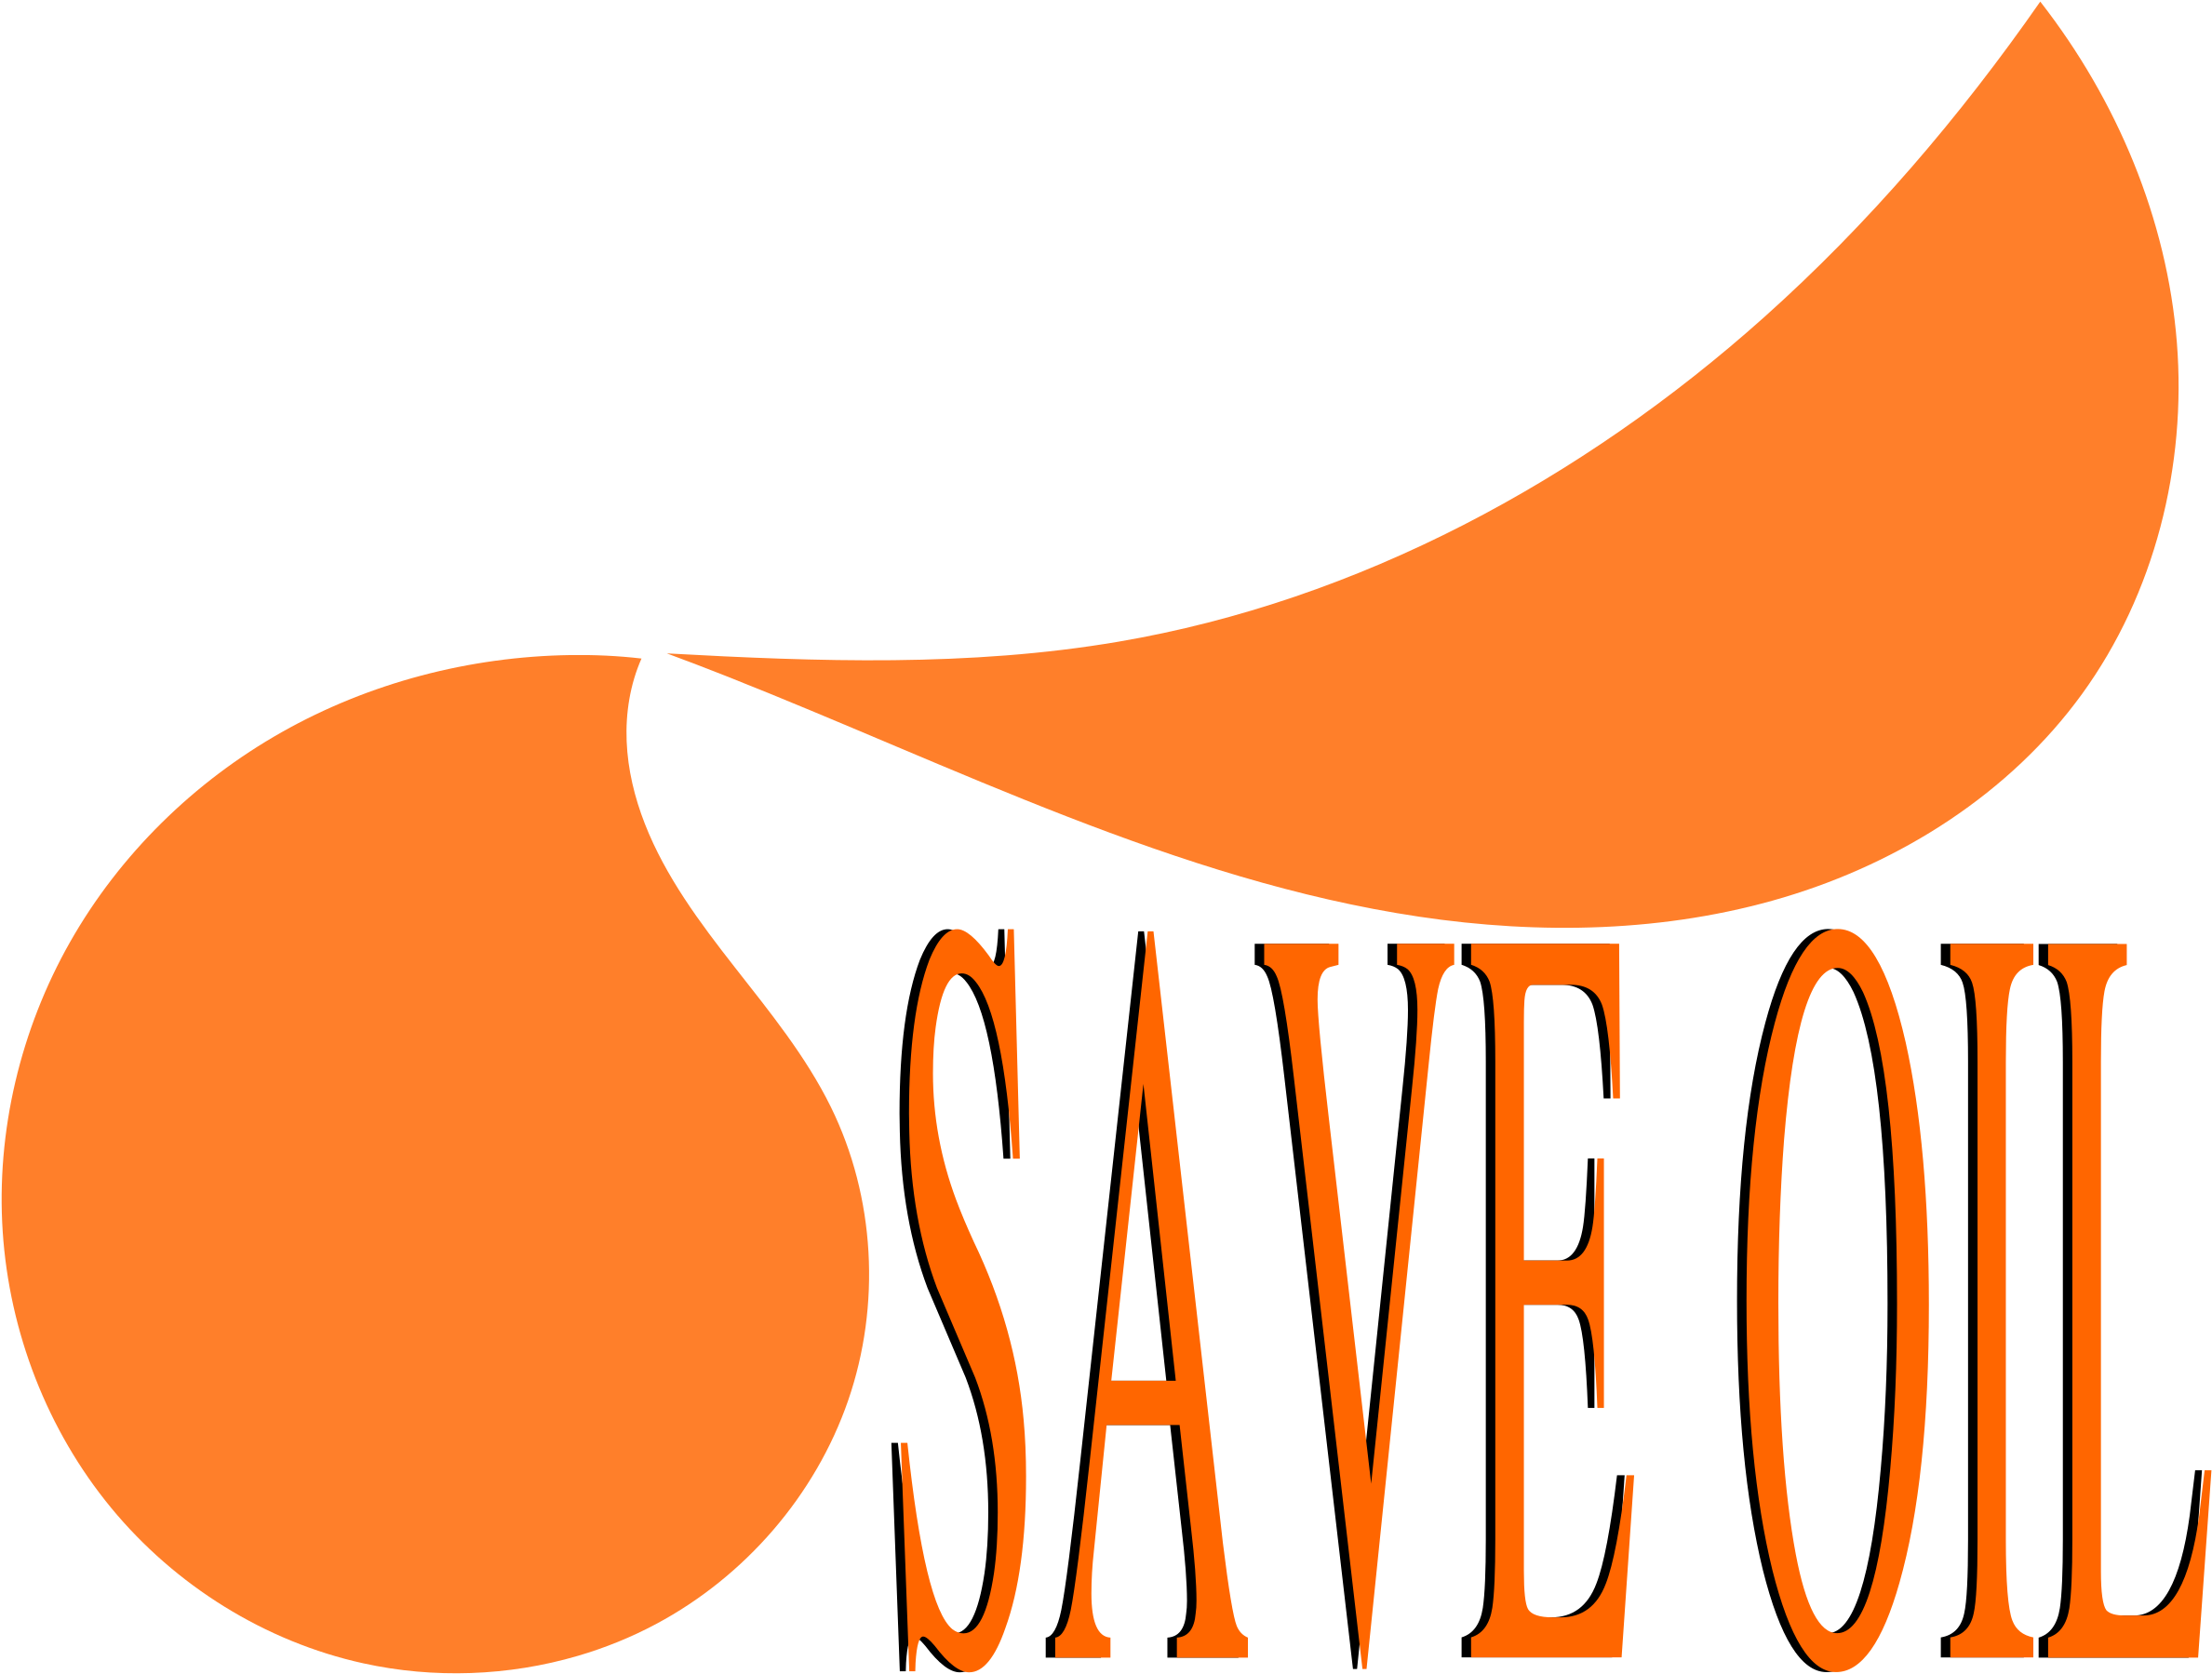 Save Oil - Logo For Save Oil (2400x1822)